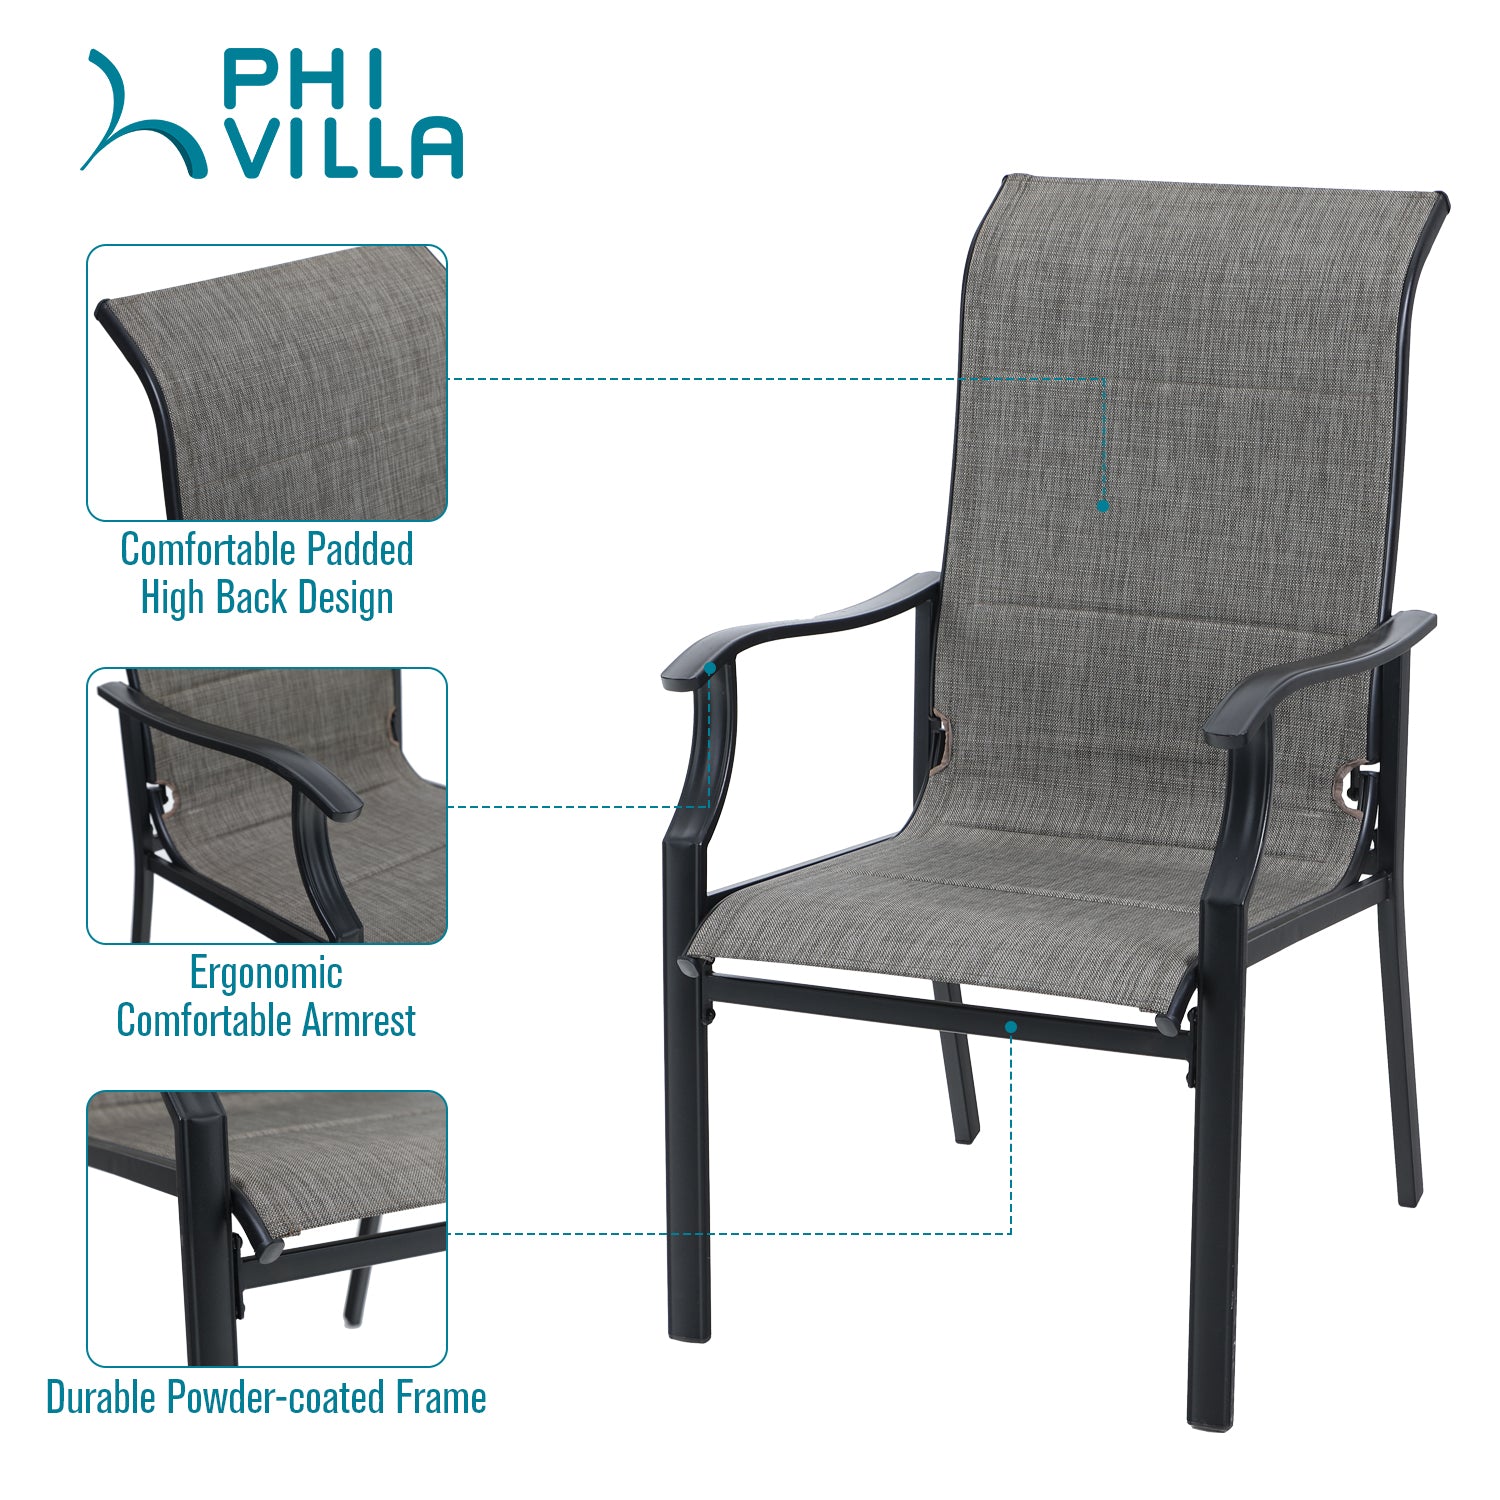 PHI VILLA 7-Piece Embossed Rectangle Table & High-back Textilene Chairs